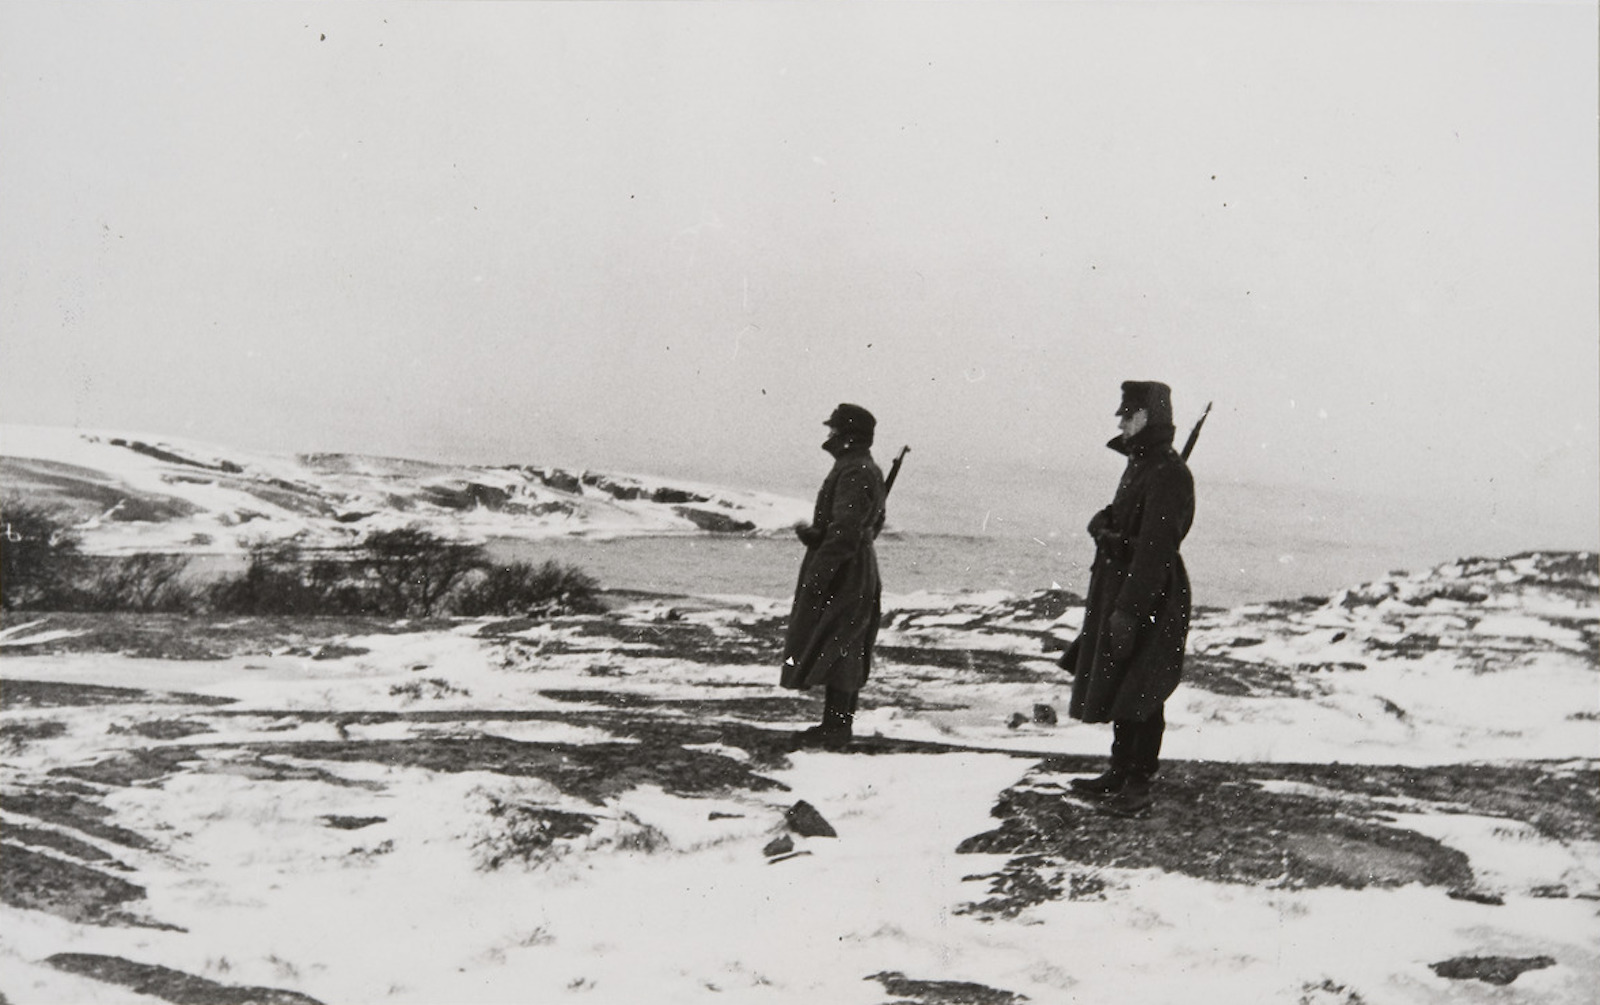 Finnish soldiers stand guard during the Winter War, c. 1939-1940. Finnish Heritage Agency (CC BY 4.0).